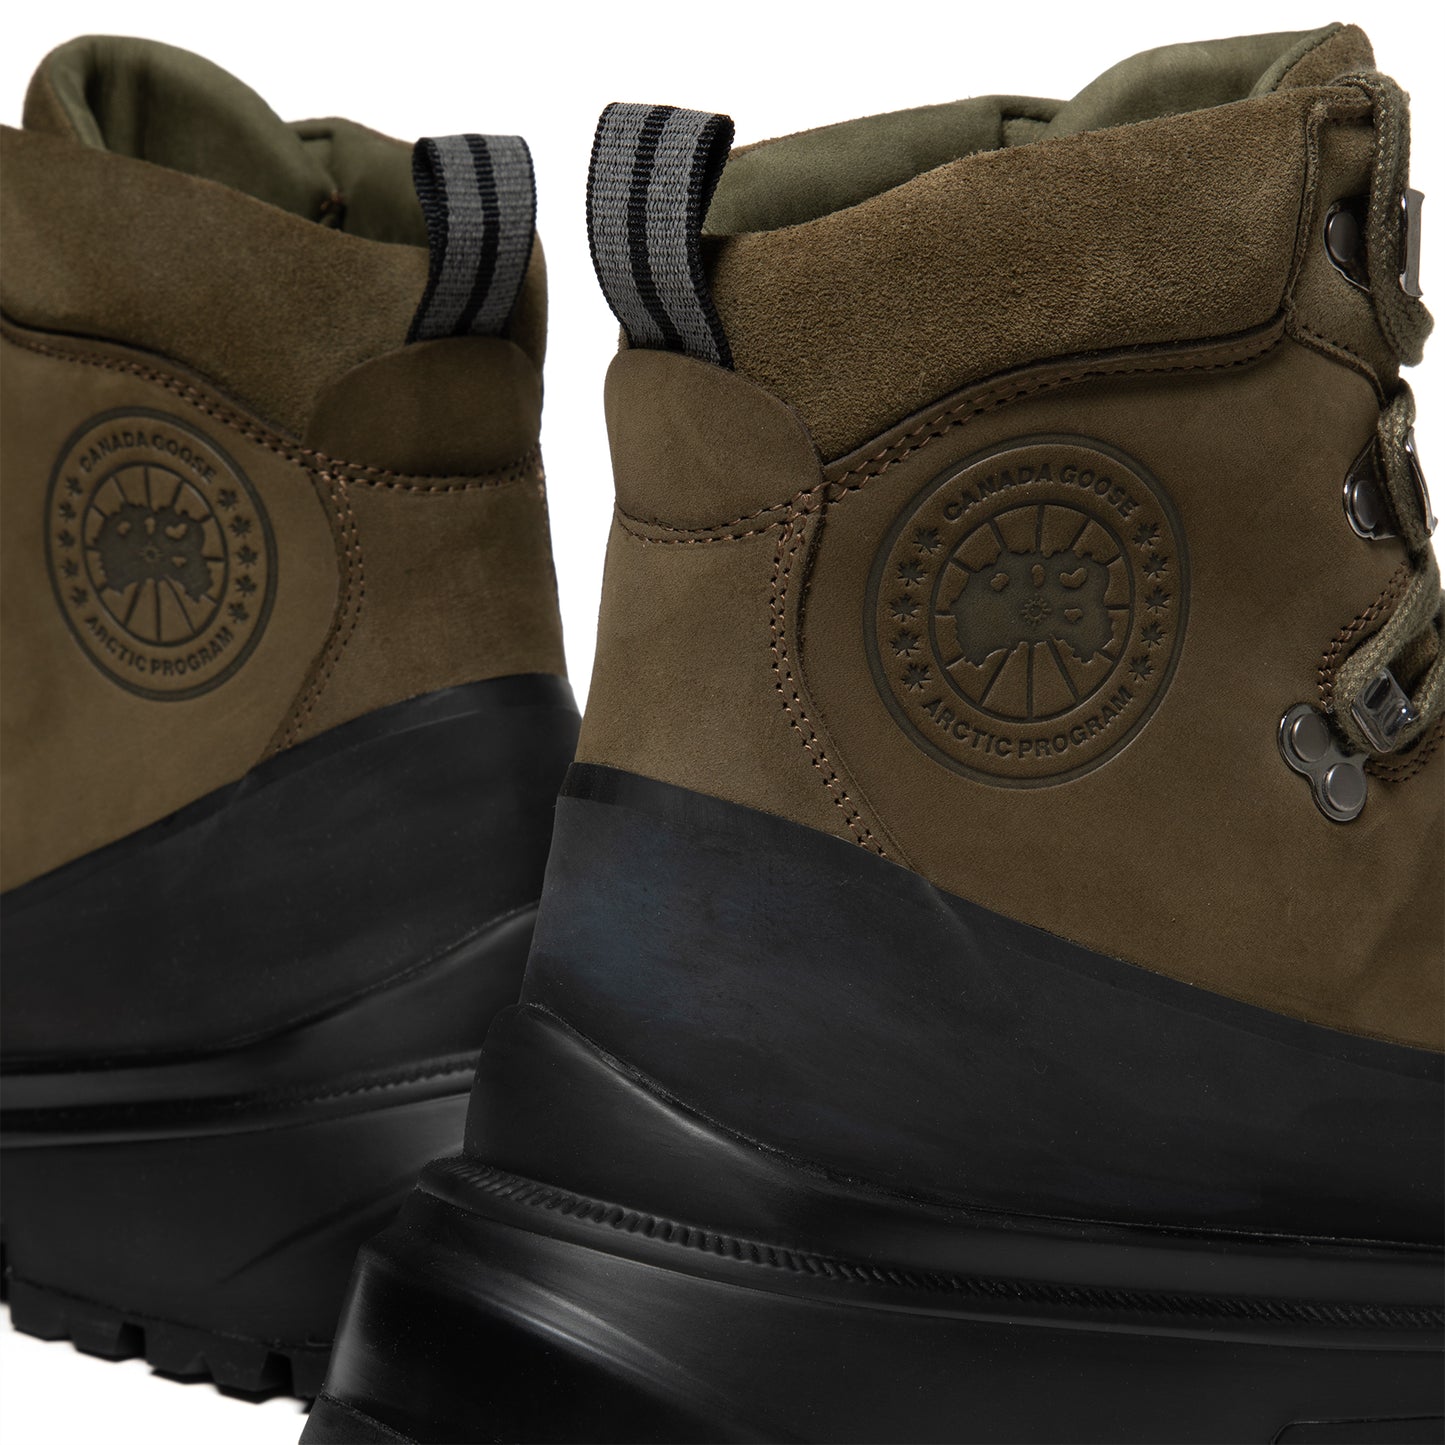 Canada Goose Womens Journey Boot (Military Green/Black)